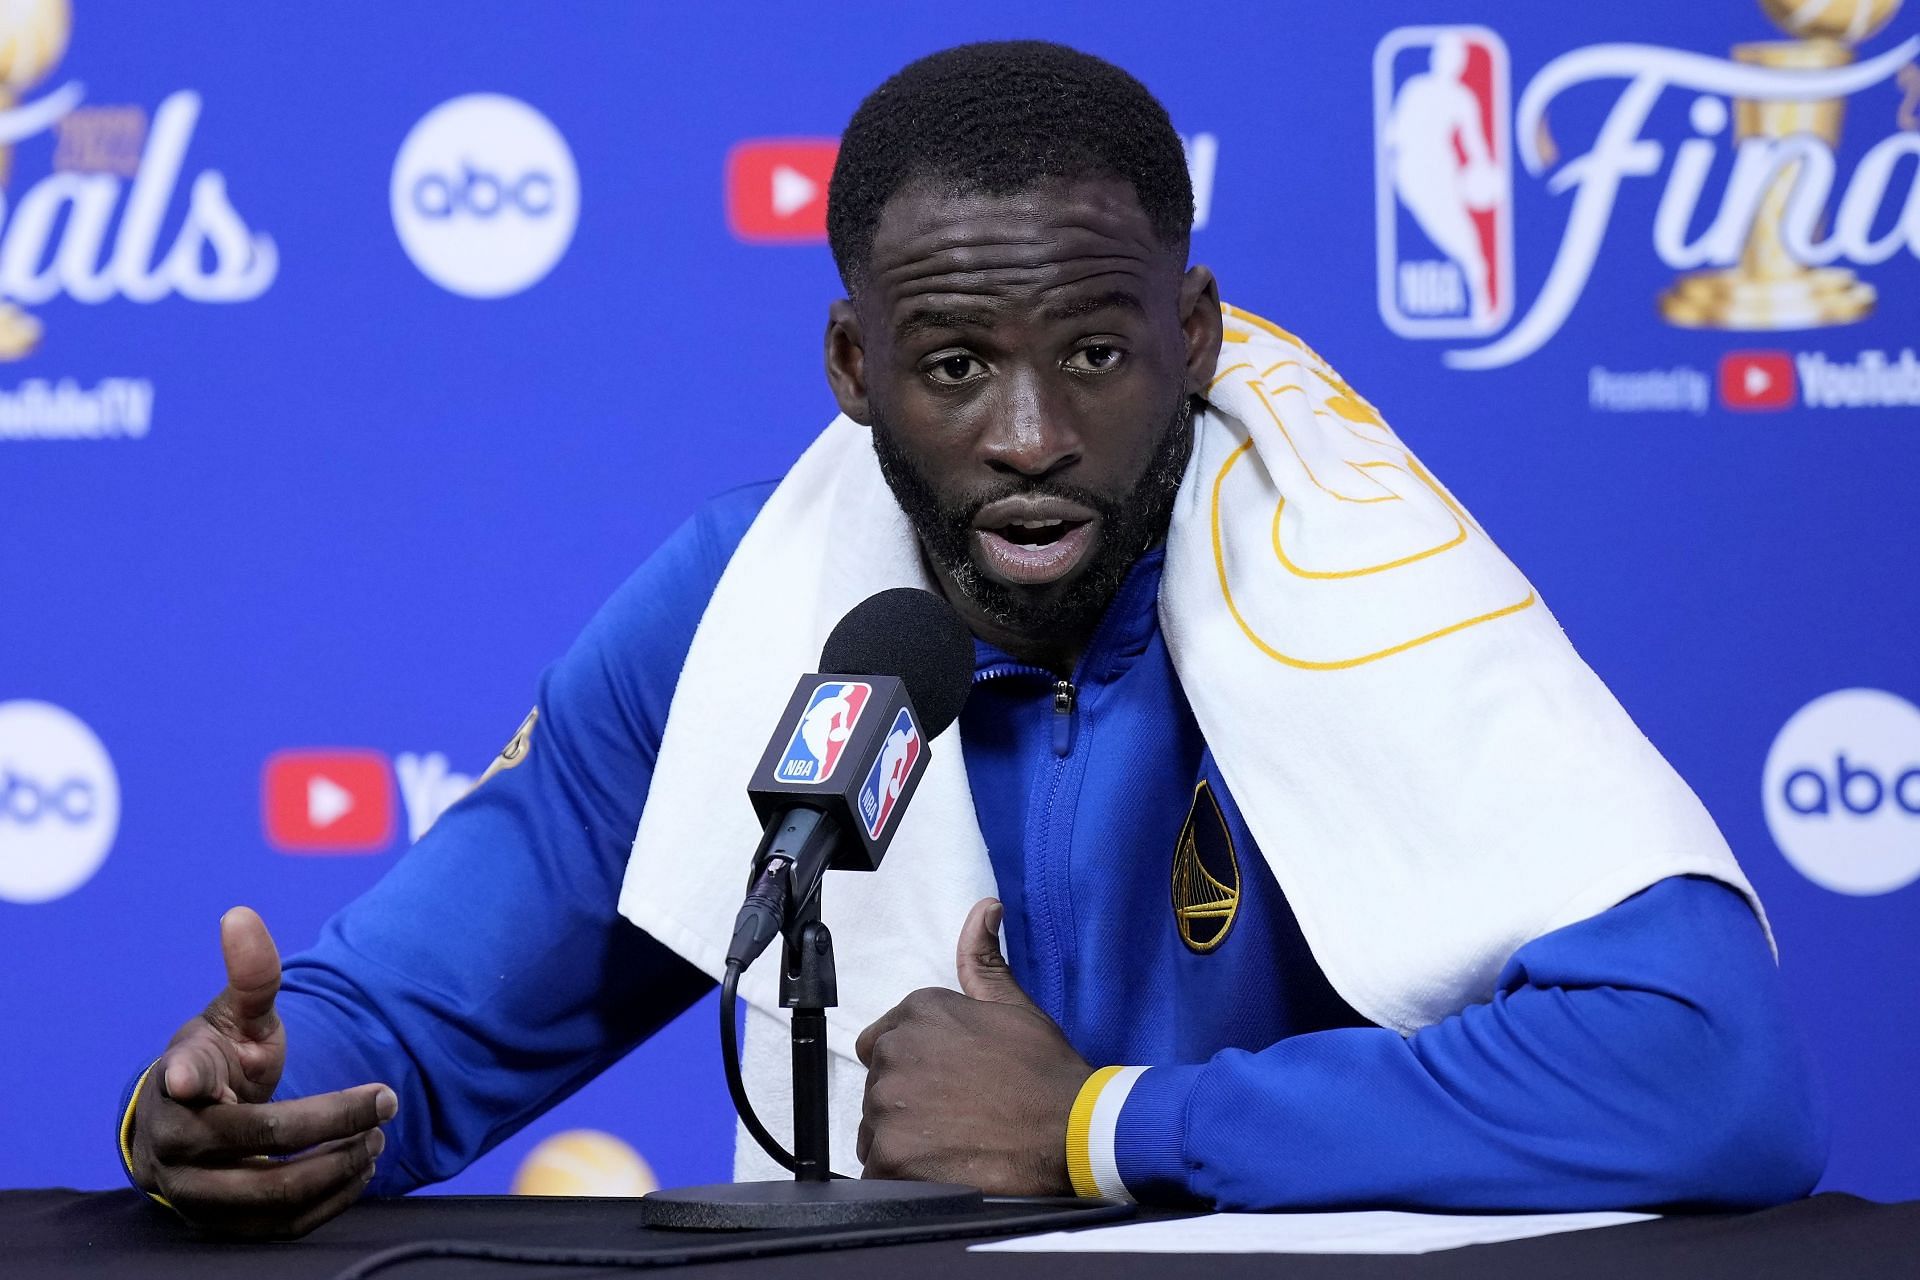 Draymond Green recognized all his teammates efforts in the post-game interview